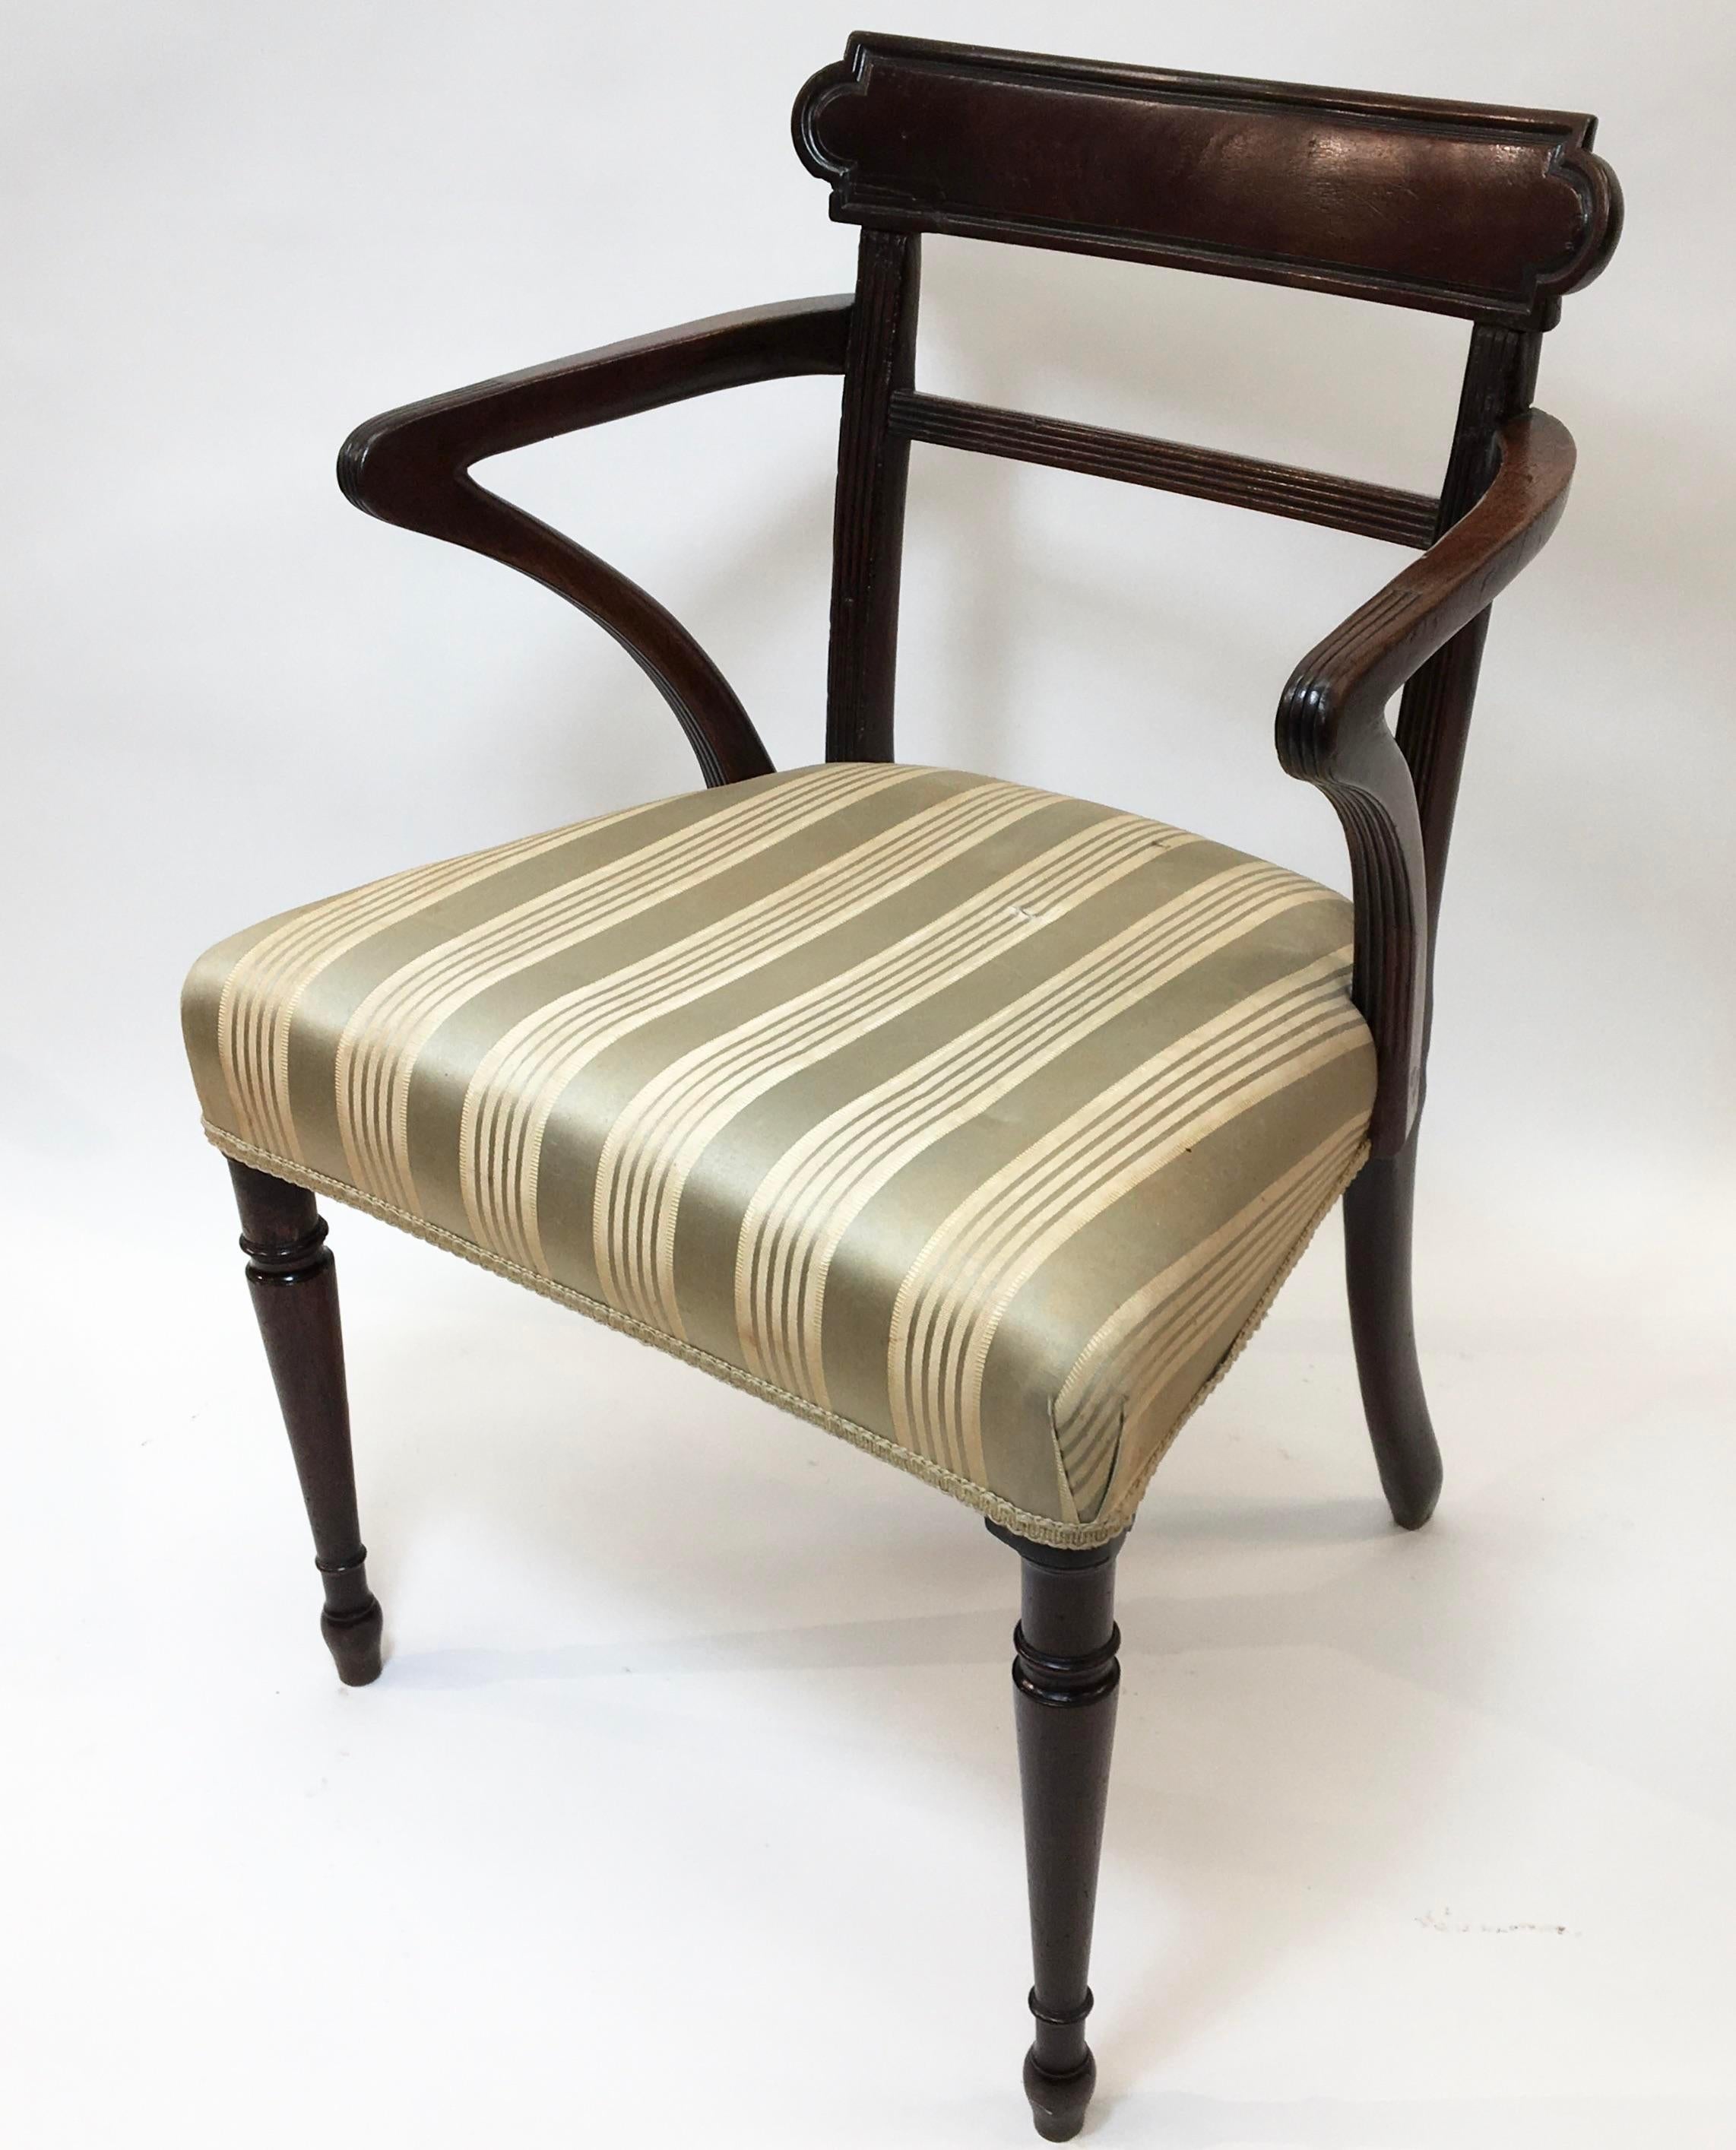 Mahogany Regency arm chair with a striped silk upholstered seat.